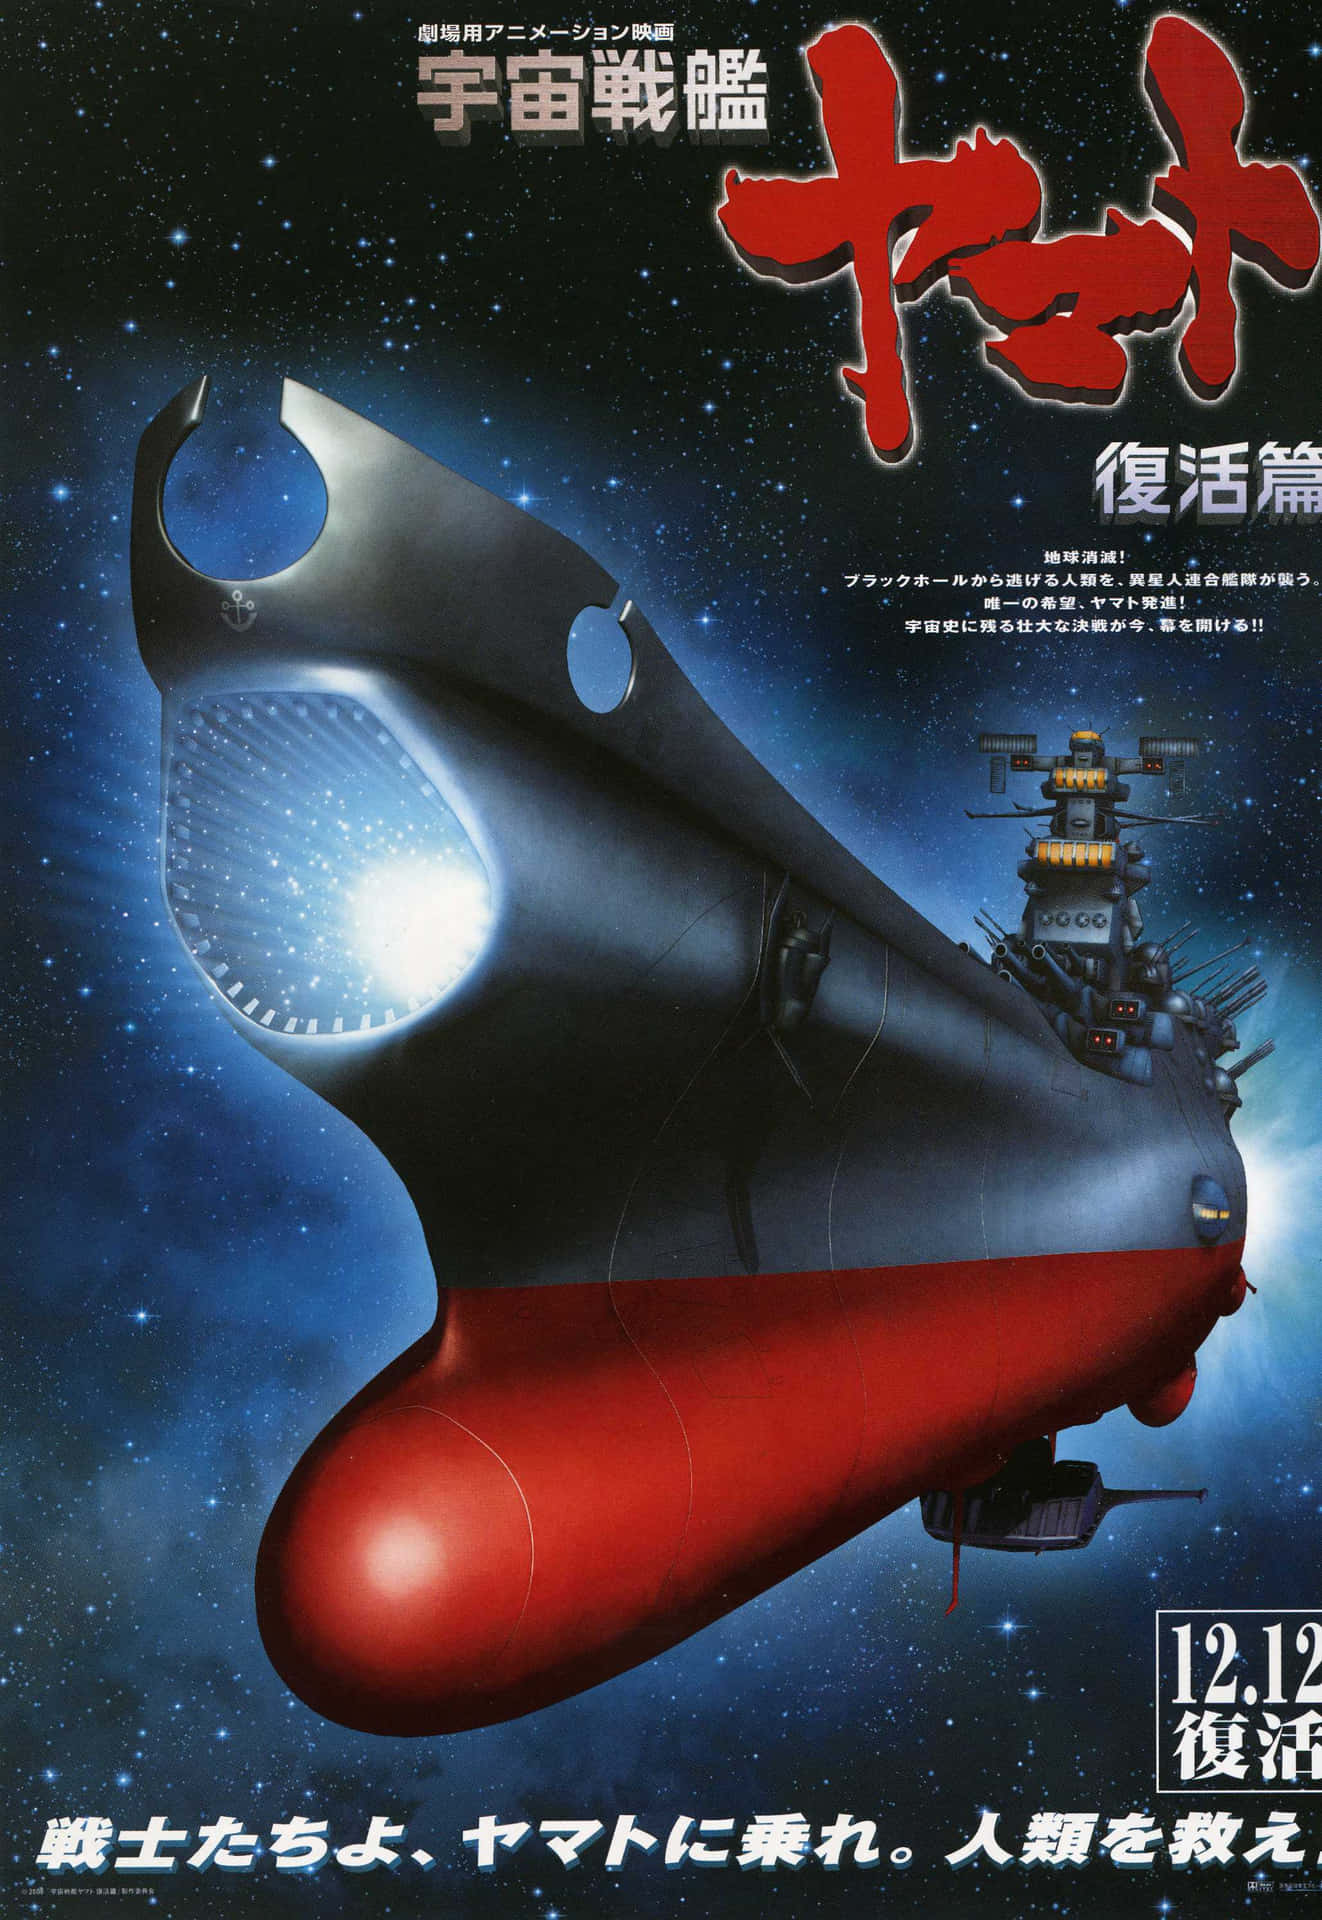 Courageous crew of the Space Battleship Yamato embraces their mission Wallpaper